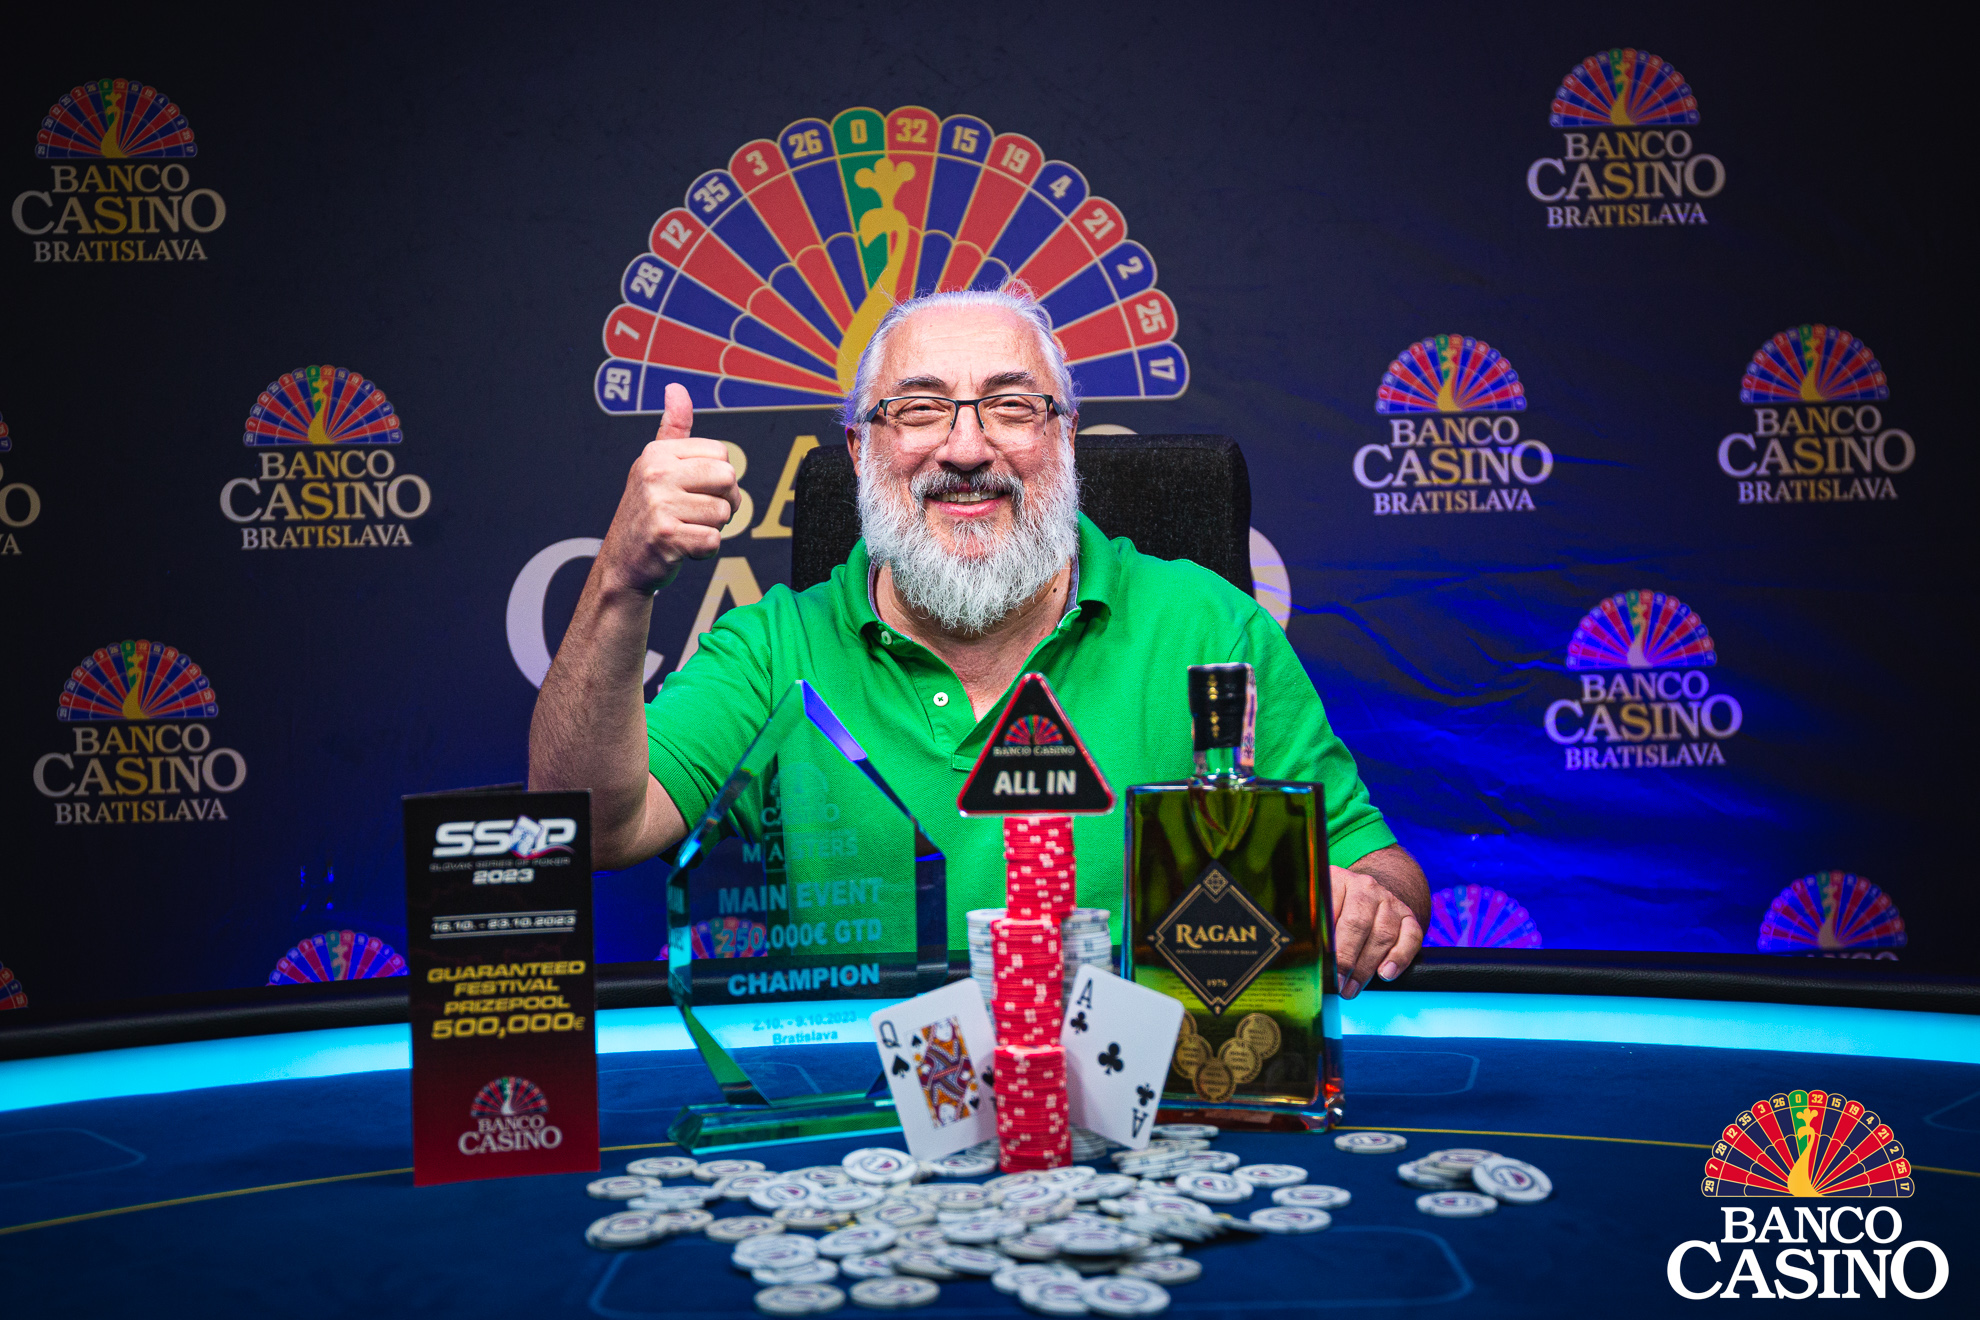 PETER KAMARAS BECAME CHAMPION OF BANCO CASINO MASTERS #36 AND TAKES HOME 33,900€!